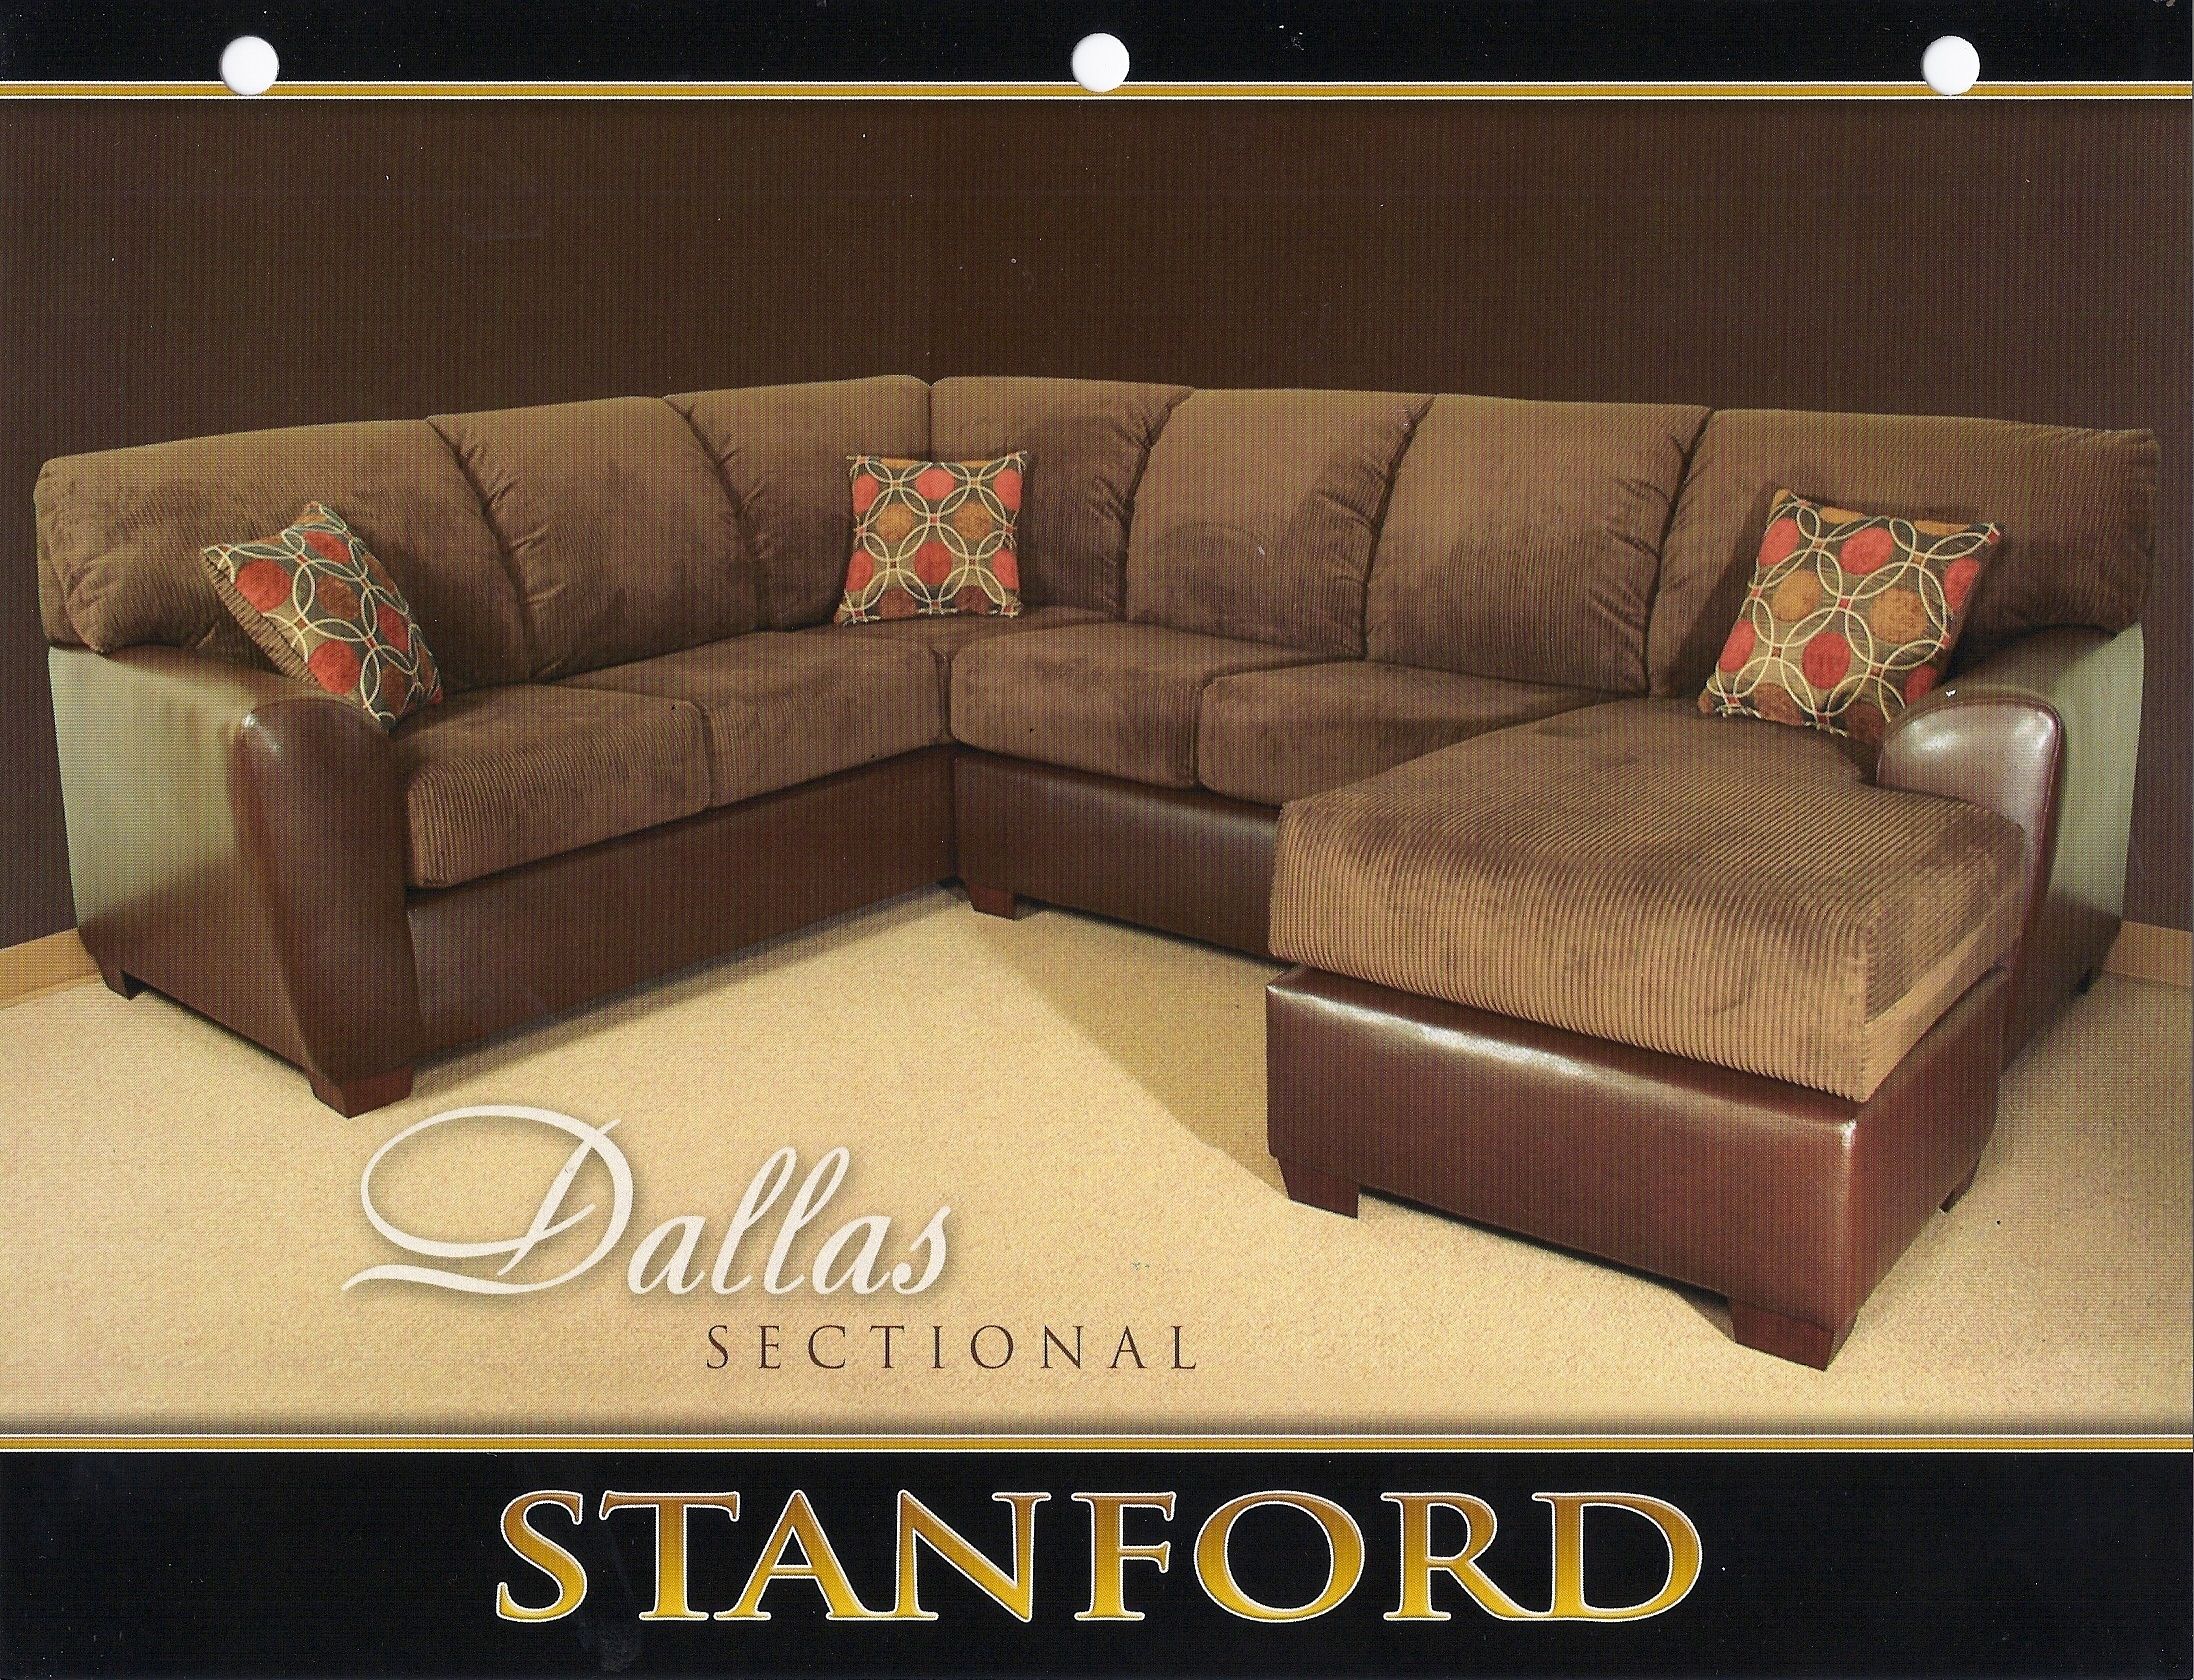 Sectional Sofa Design: Comfort Sectional Sofas Dallas Modern Intended For Dallas Sectional Sofas (View 4 of 10)